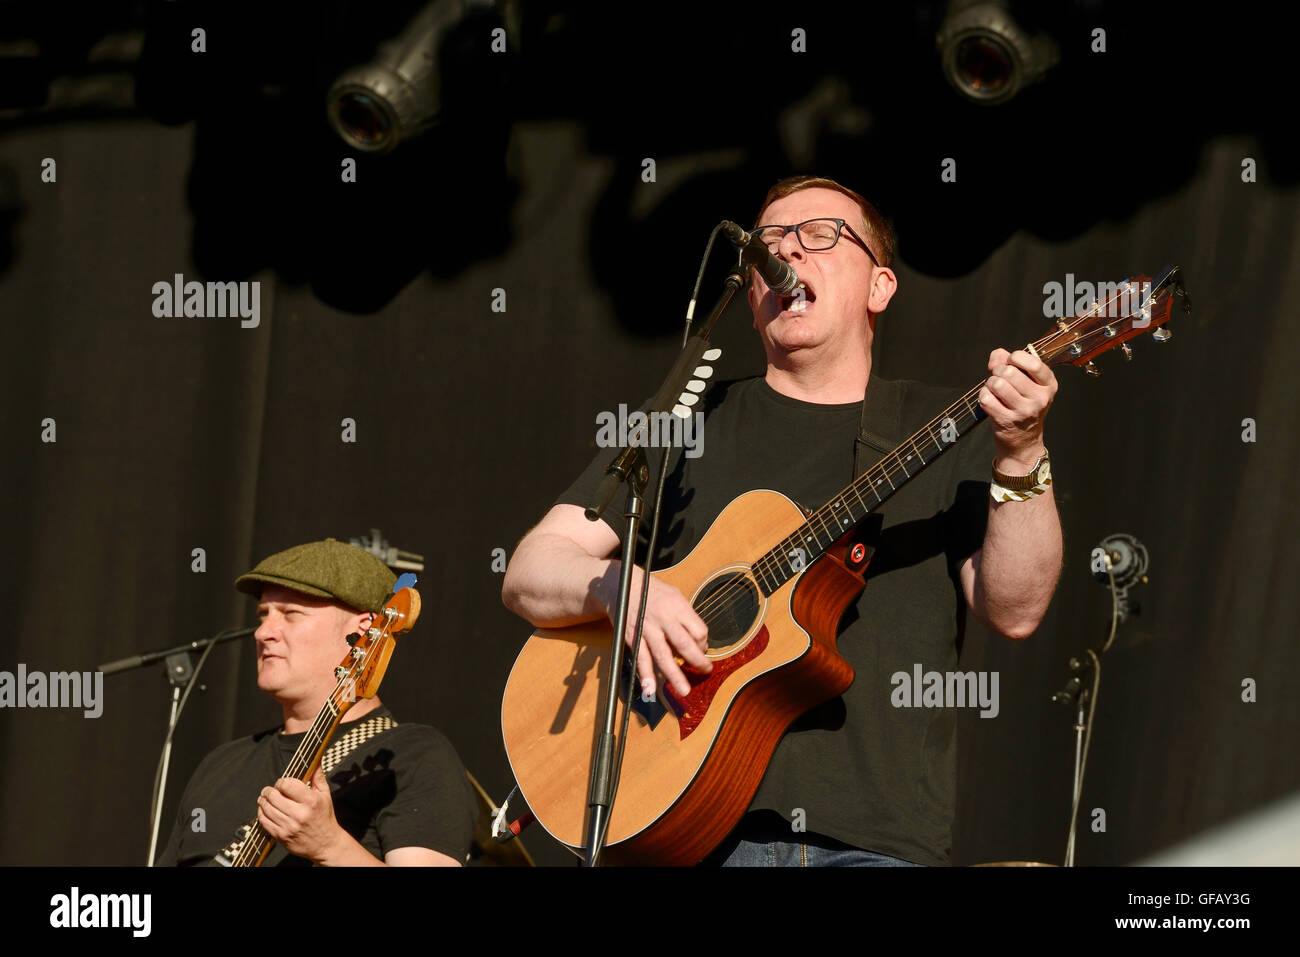 Carfest North, Bolesworth, Cheshire, UK. 30th July 2016. The Proclaimers performing on the main stage. The event is the brainchild of Chris Evans and features 3 days of cars, music and entertainment with profits being donated to the charity Children in Need. Andrew Paterson/Alamy Live News Stock Photo